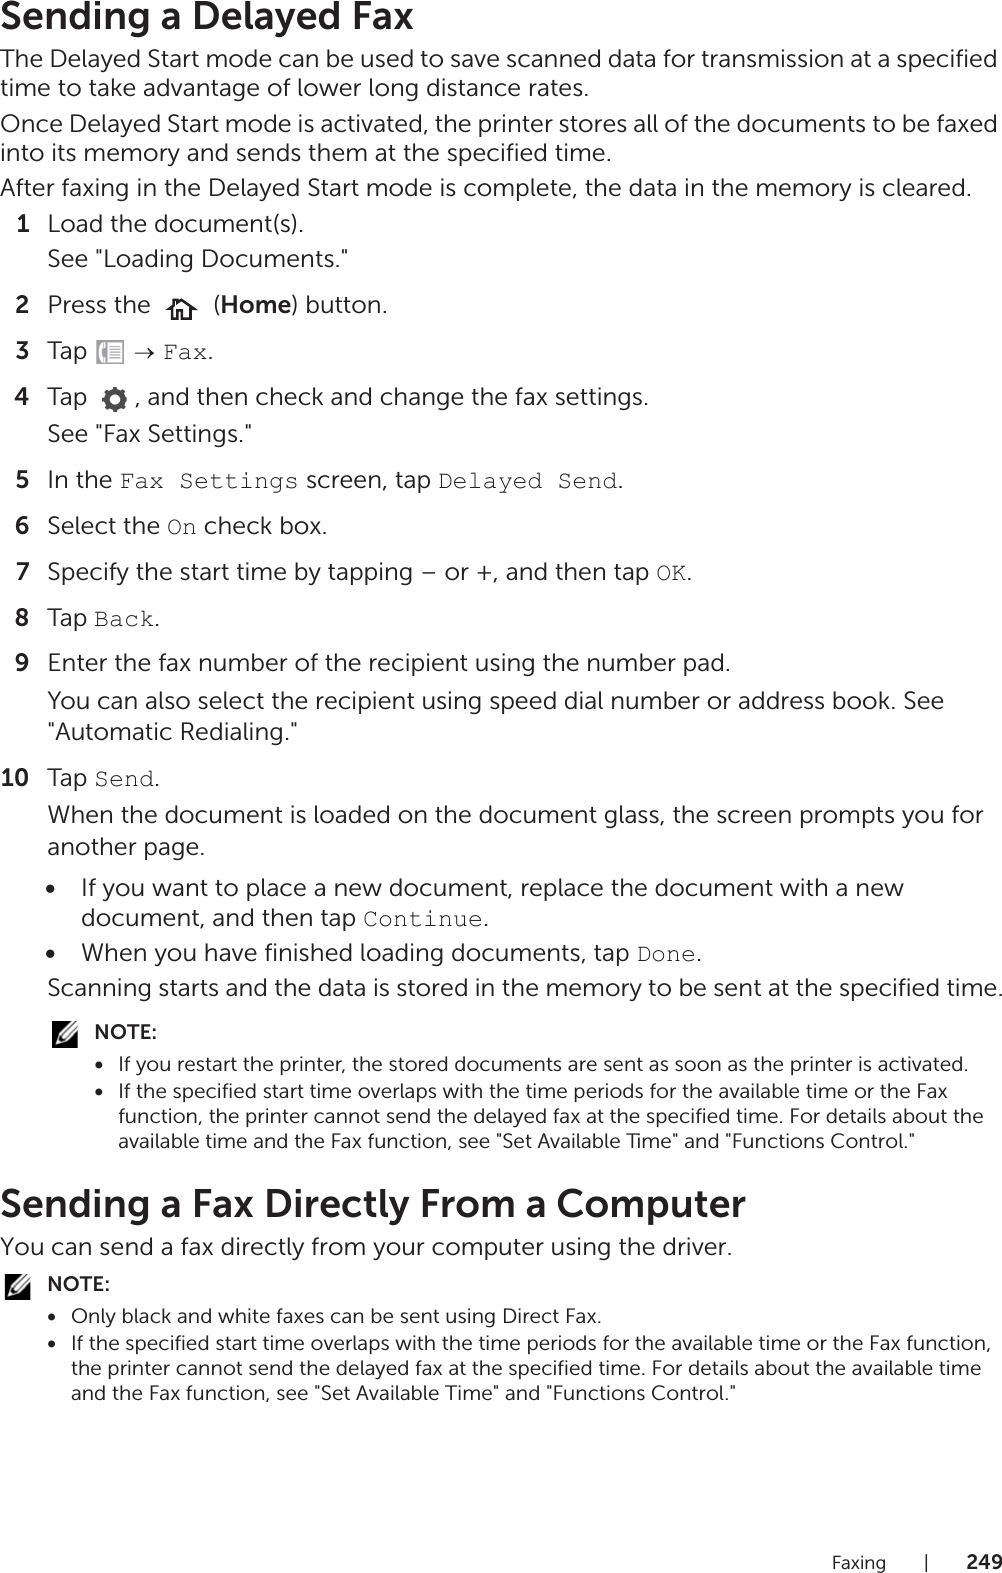 Faxing |249Sending a Delayed FaxThe Delayed Start mode can be used to save scanned data for transmission at a specified time to take advantage of lower long distance rates.Once Delayed Start mode is activated, the printer stores all of the documents to be faxed into its memory and sends them at the specified time.After faxing in the Delayed Start mode is complete, the data in the memory is cleared.1Load the document(s).See &quot;Loading Documents.&quot;2Press the   (Home) button.3Tap   Fax.4Tap  , and then check and change the fax settings.See &quot;Fax Settings.&quot;5In the Fax Settings screen, tap Delayed Send.6Select the On check box.7Specify the start time by tapping – or +, and then tap OK.8Tap Back.9Enter the fax number of the recipient using the number pad.You can also select the recipient using speed dial number or address book. See &quot;Automatic Redialing.&quot;10 Tap Send.When the document is loaded on the document glass, the screen prompts you for another page.•If you want to place a new document, replace the document with a new document, and then tap Continue.•When you have finished loading documents, tap Done.Scanning starts and the data is stored in the memory to be sent at the specified time.NOTE:•If you restart the printer, the stored documents are sent as soon as the printer is activated.•If the specified start time overlaps with the time periods for the available time or the Fax function, the printer cannot send the delayed fax at the specified time. For details about the available time and the Fax function, see &quot;Set Available Time&quot; and &quot;Functions Control.&quot;Sending a Fax Directly From a ComputerYou can send a fax directly from your computer using the driver.NOTE:•Only black and white faxes can be sent using Direct Fax.•If the specified start time overlaps with the time periods for the available time or the Fax function, the printer cannot send the delayed fax at the specified time. For details about the available time and the Fax function, see &quot;Set Available Time&quot; and &quot;Functions Control.&quot;